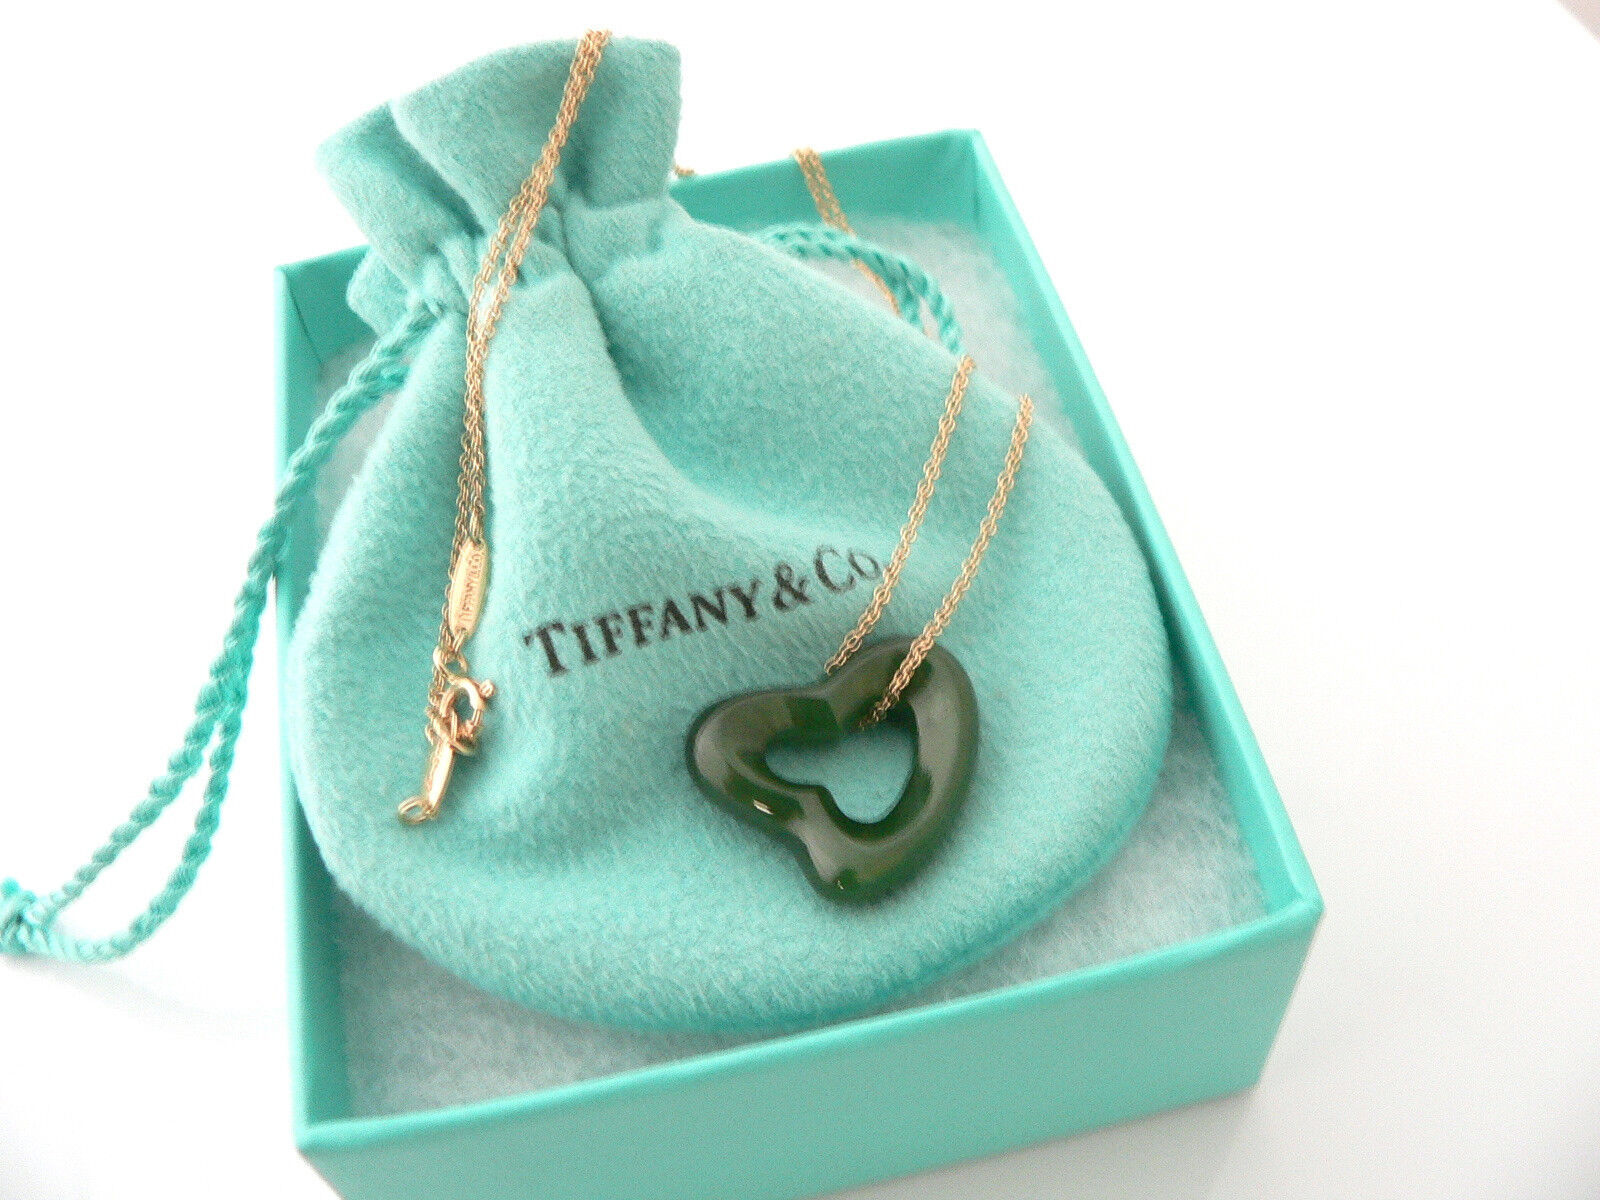 Tiffany & Co 18K Gold Large Jade Gemstone Heart Necklace Pendant Gift Love Pouch - $2,498.00